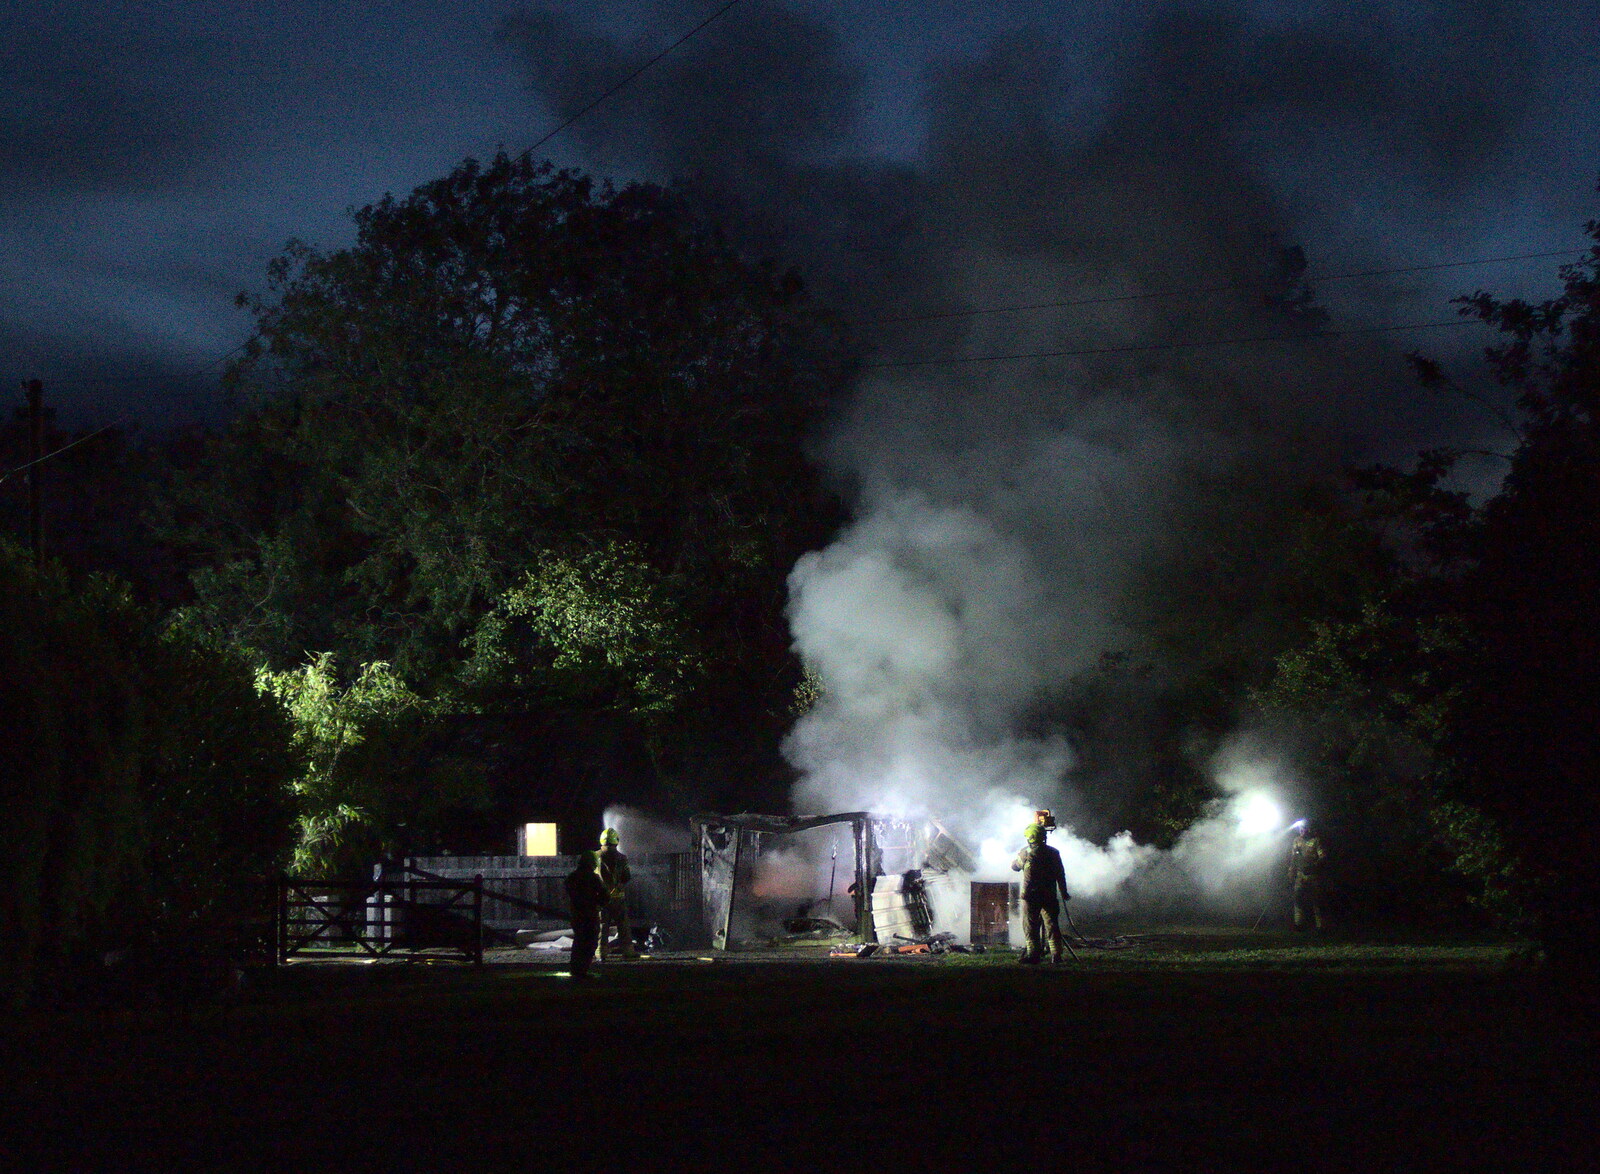 The fire is more-or-less out now from A Fire, a Fête, and a Scout Camp, Hallowtree, Suffolk - 30th June 2022